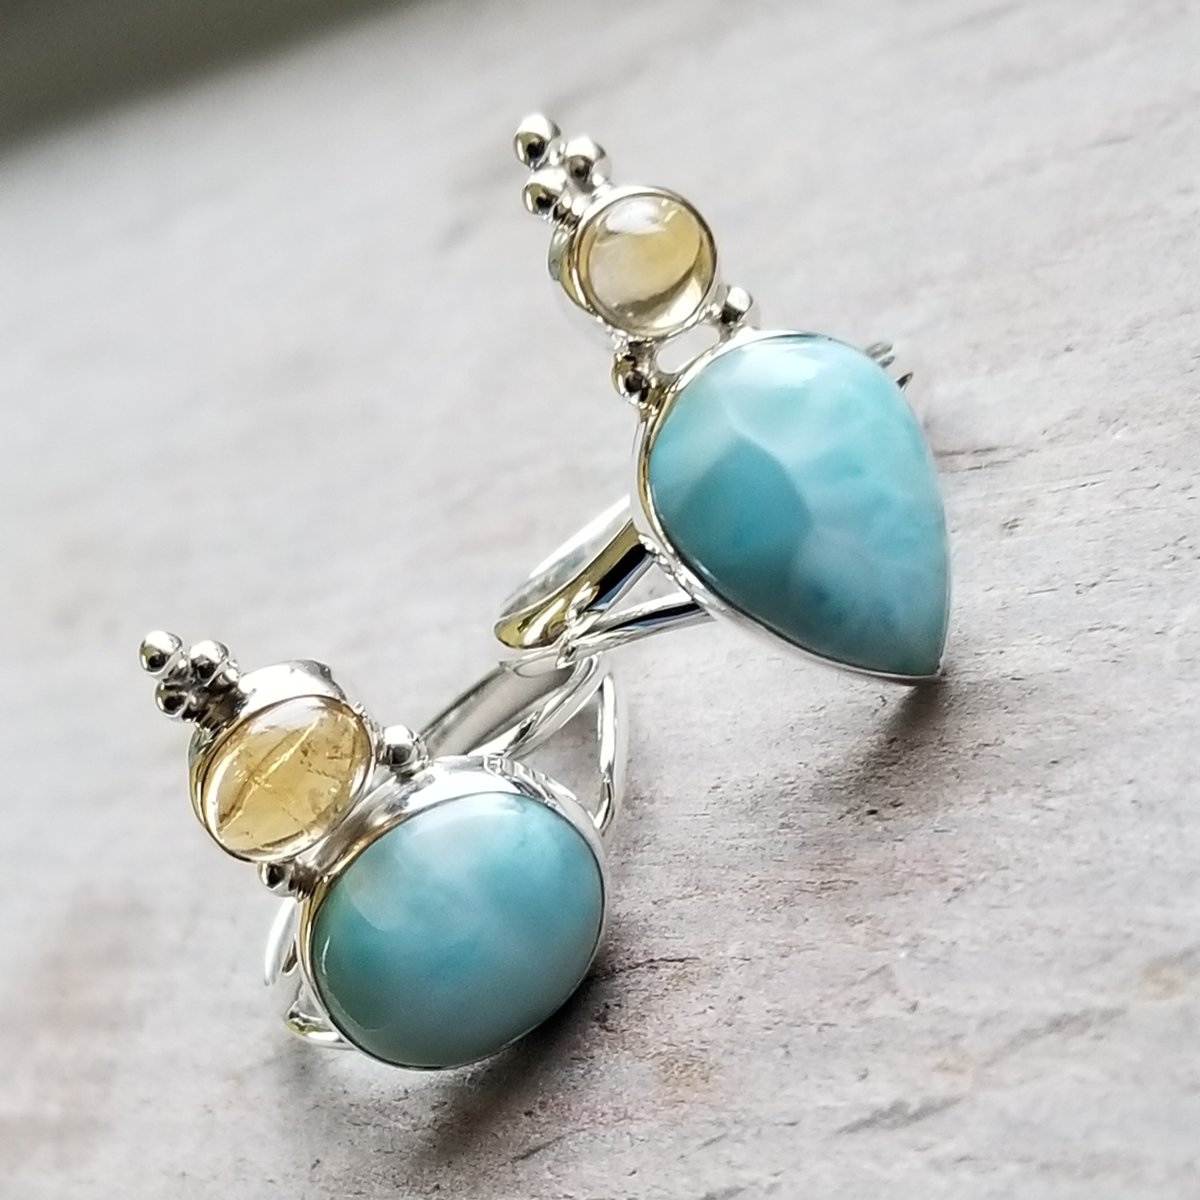 Lady Jane Ring - Citrine and Larimar in Sterling